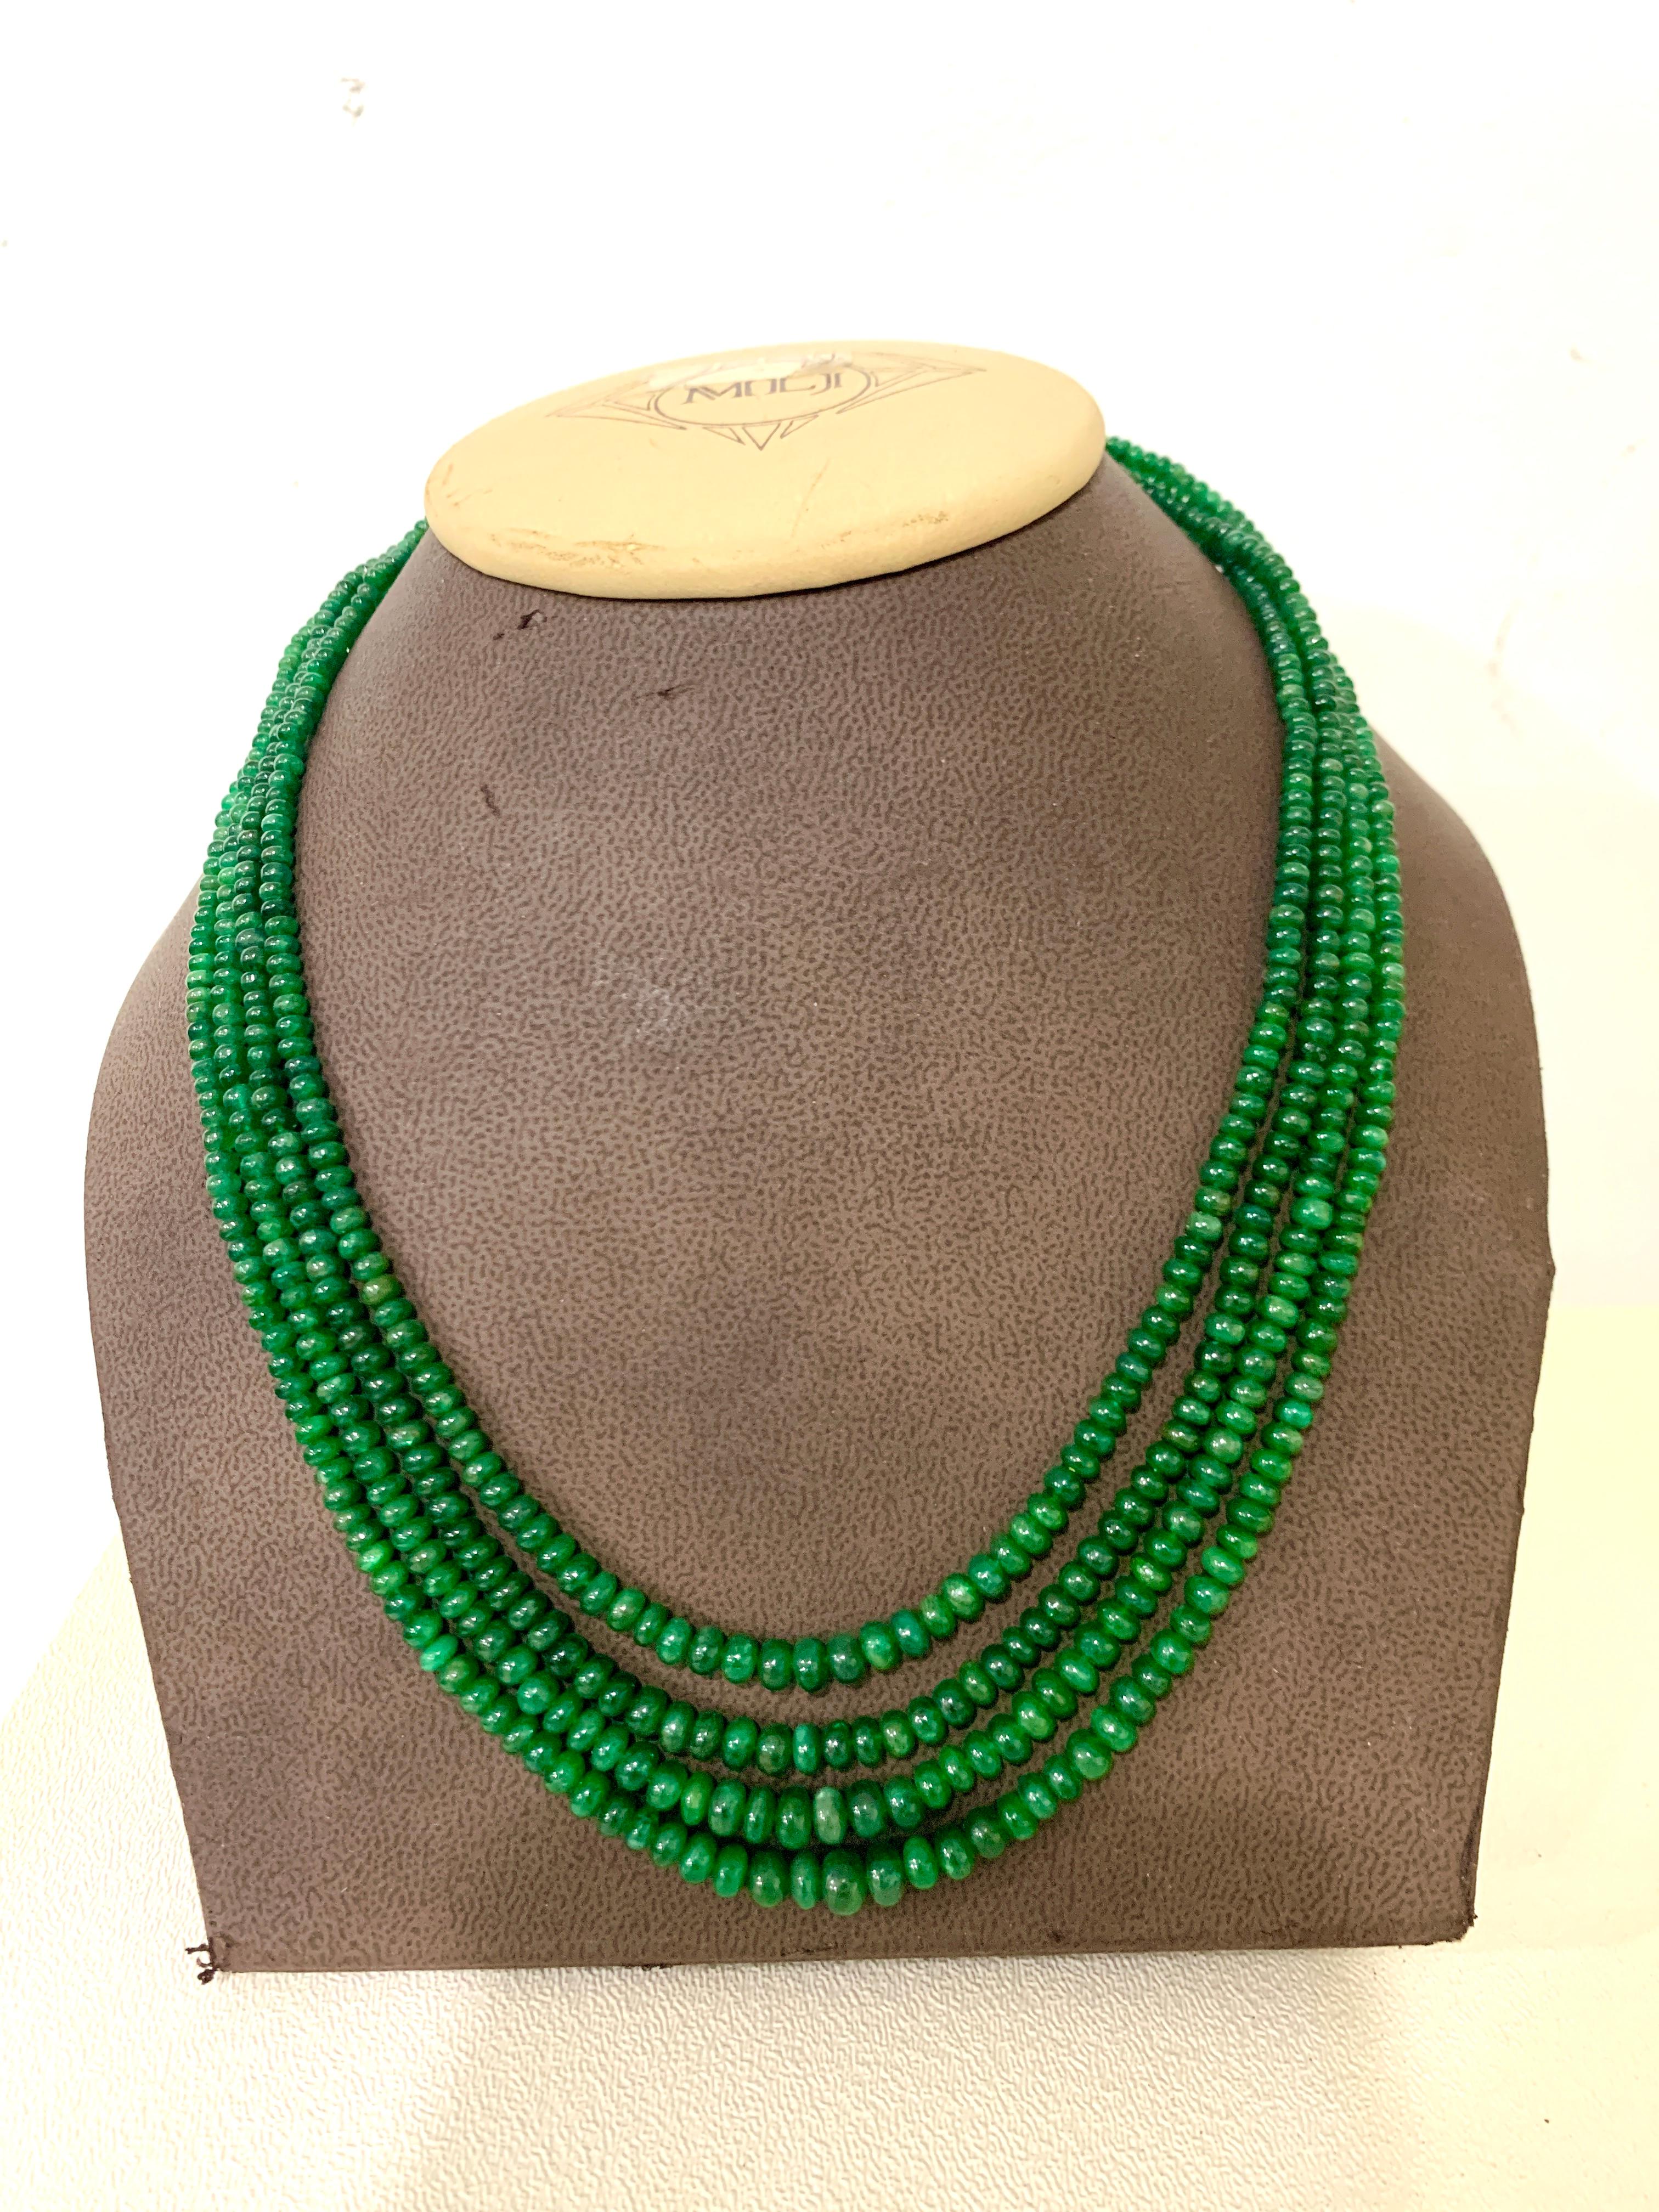 205  Carats 4 Layer Brazilian Emerald Bead Necklace Sterling Silver Clasp
This spectacular Necklace   consisting of approximately 200 Ct   of  Fine Emerald Beads  .
A magnificent emerald bead necklace featuring a large number of Graduating emerald